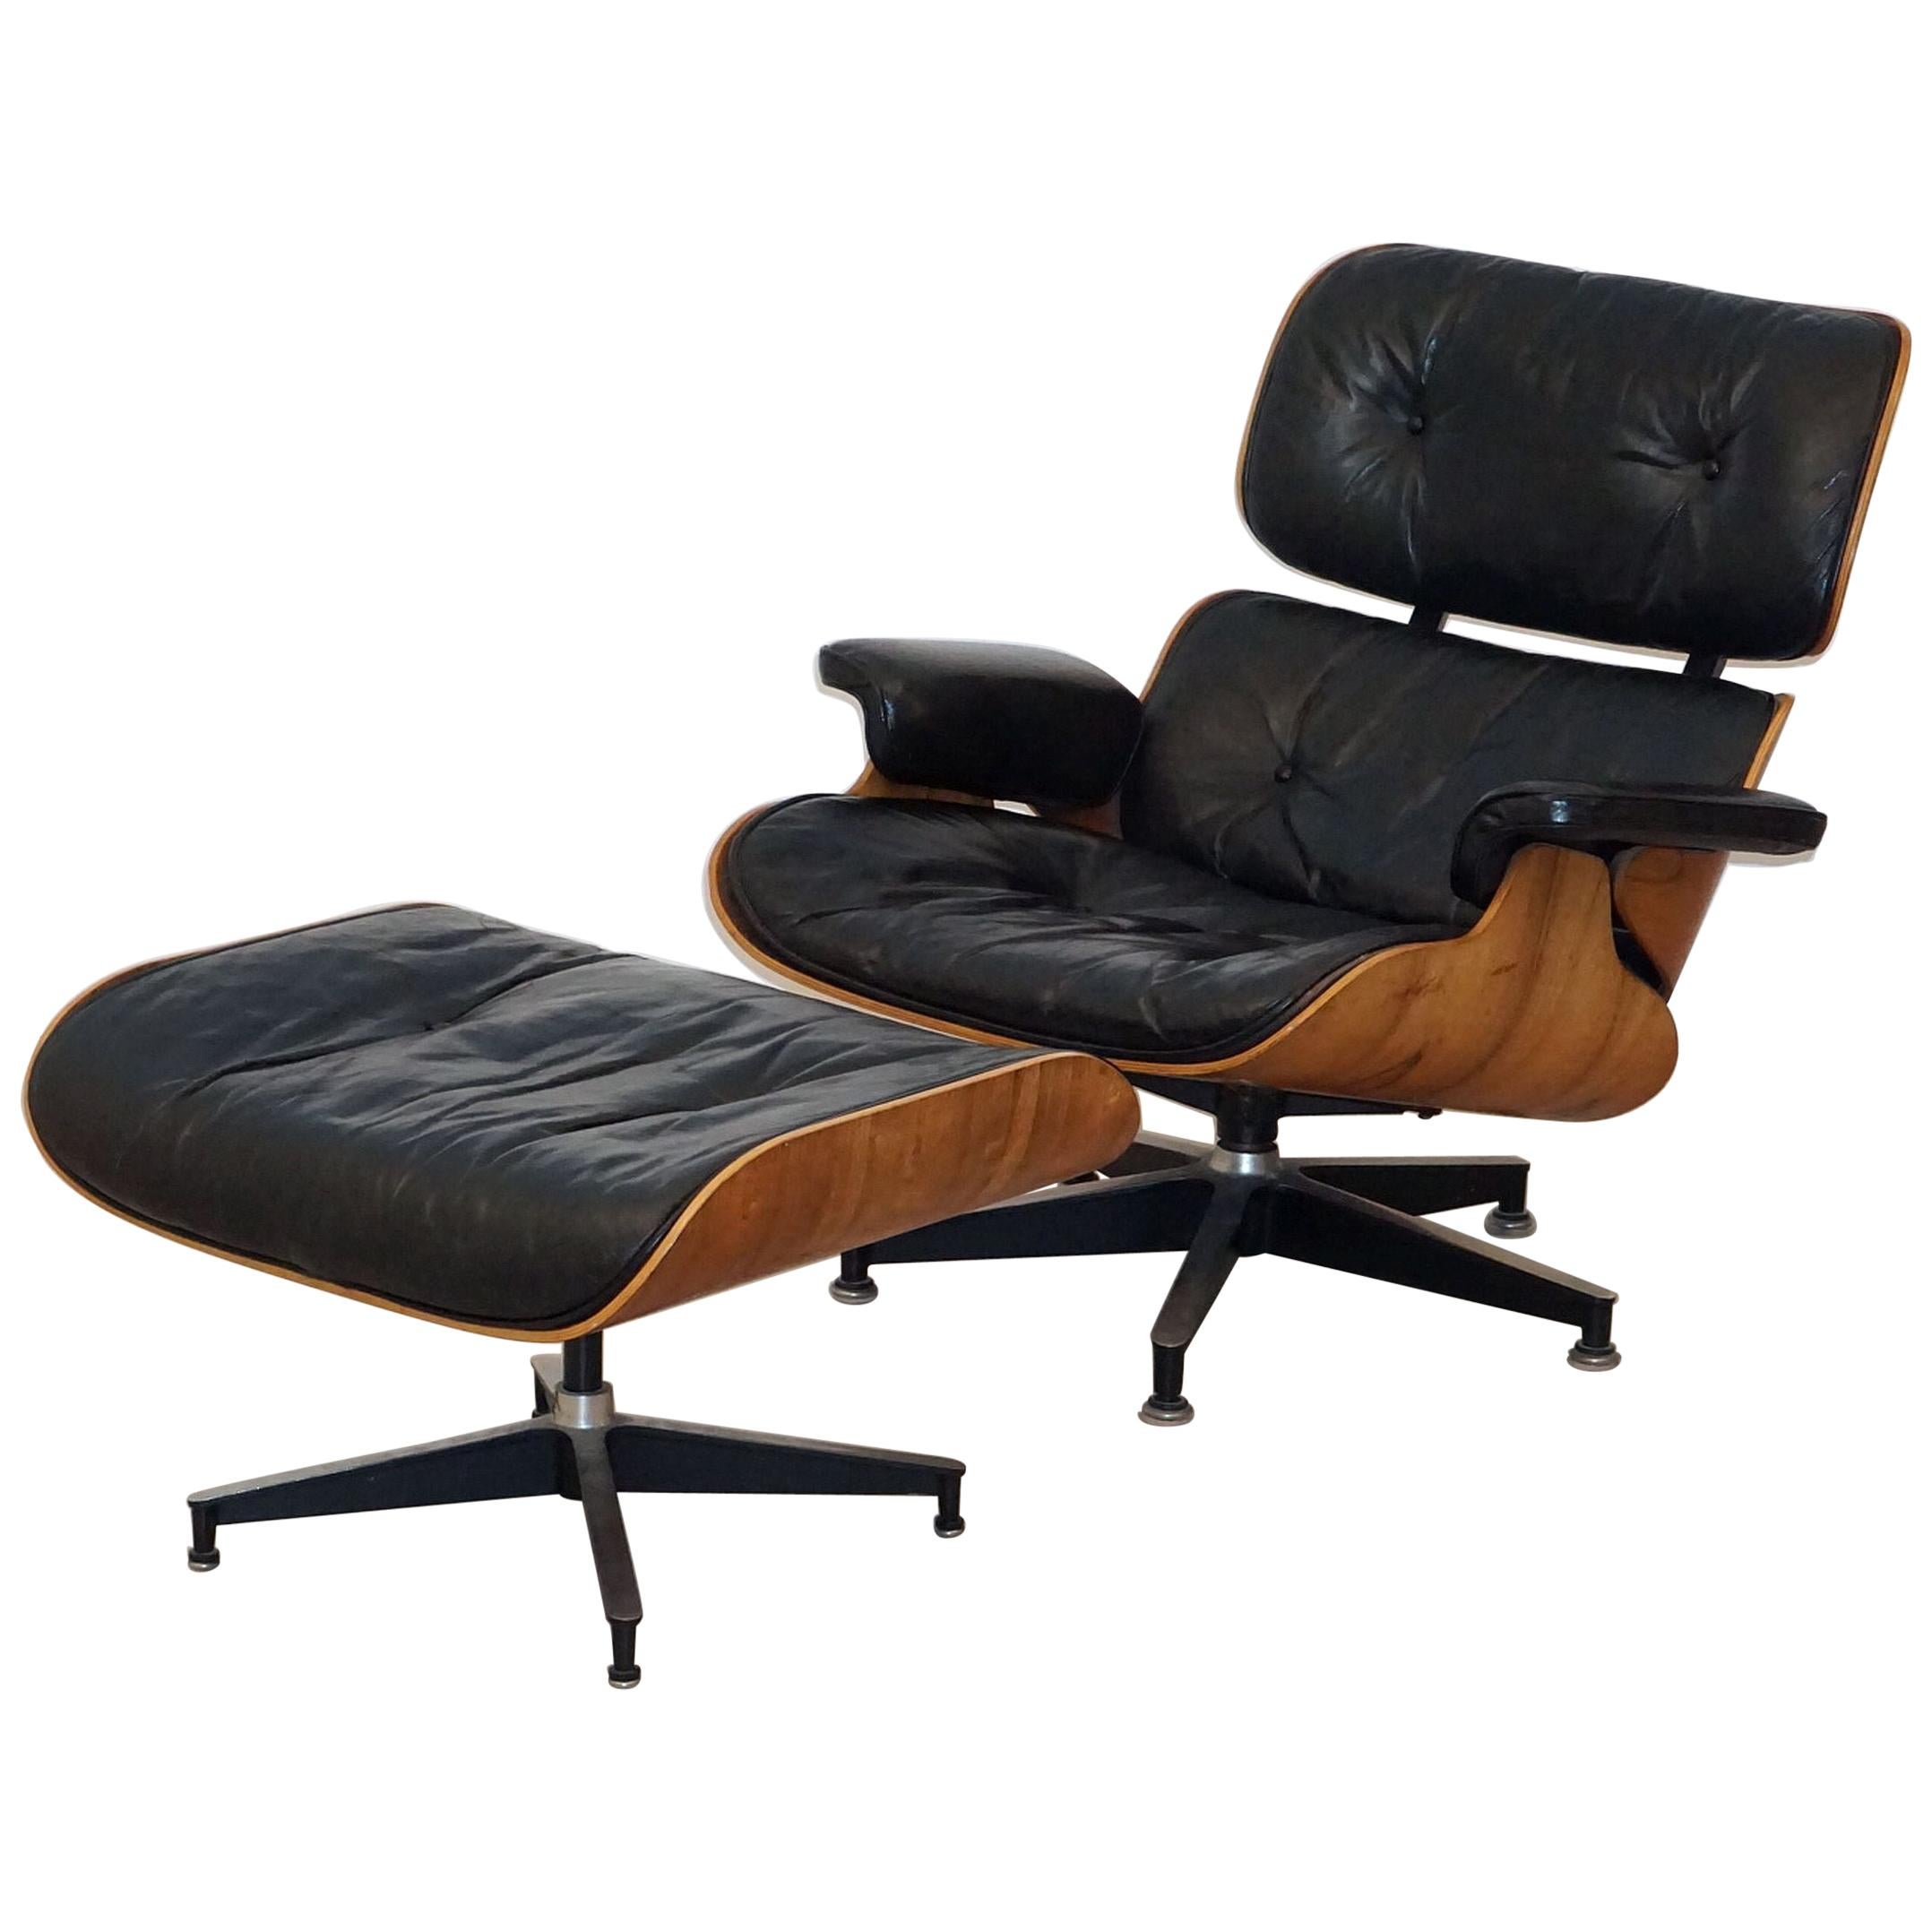 Early Production Charles and Ray Eames Rosewood Lounge Chair with Ottoman